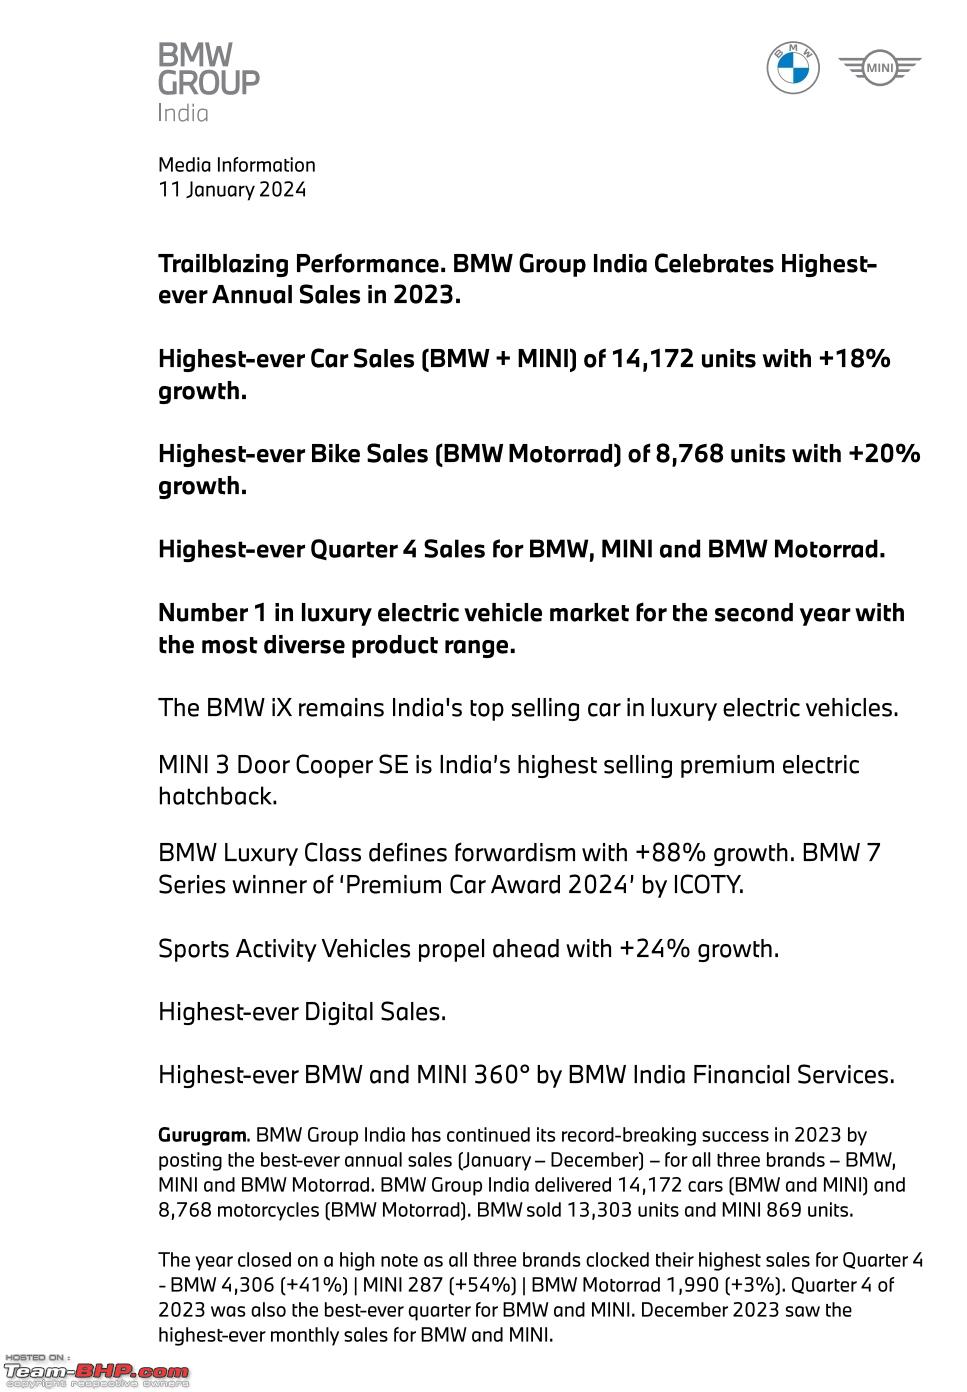 BMW Group India achieves record sales in 2023